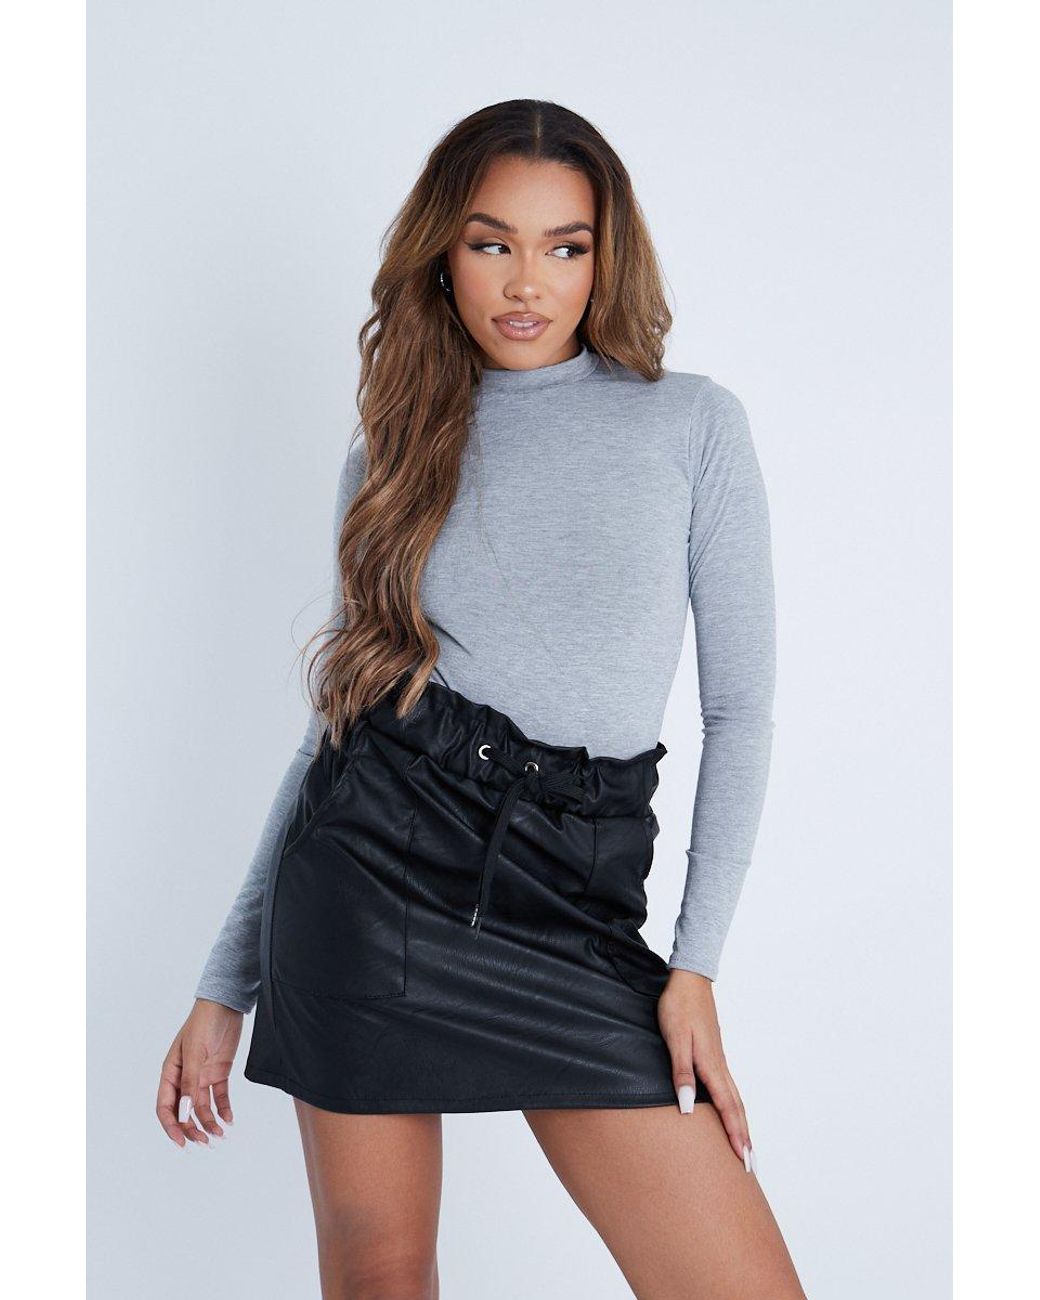 Rebellious Fashion Tan Low Rise Belted Tailored Micro Mini Skirt